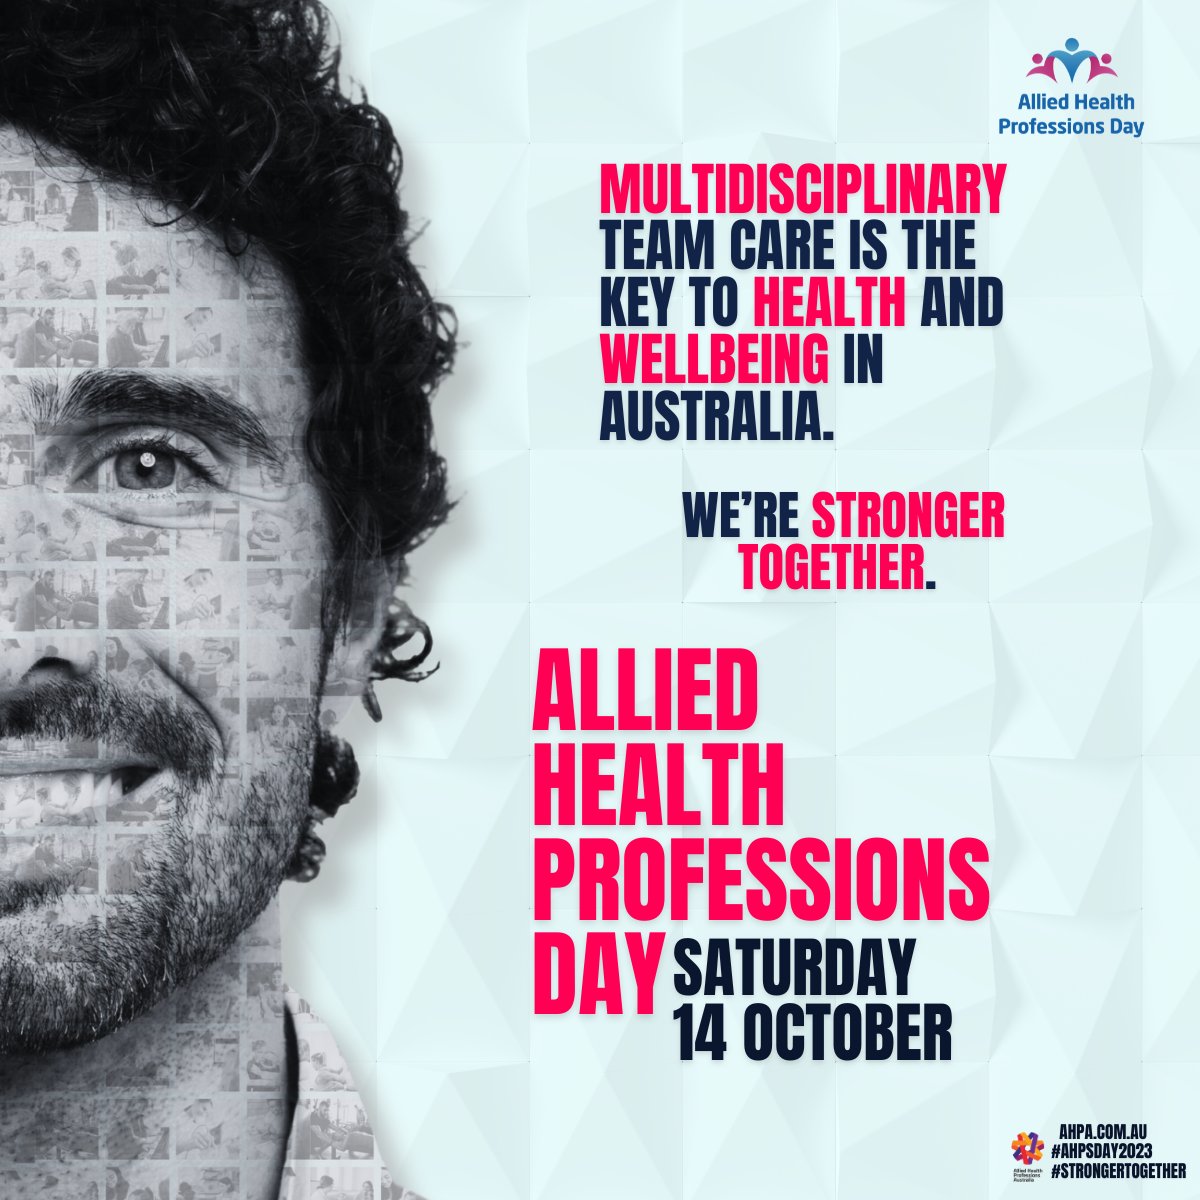 October 14th marks Allied Health Professions Day - a day to celebrate allied health professionals and raise awareness of the allied health sector 🎉 

Cheers to you, AHPs!

#AHPsDay2023 #StrongerTogether